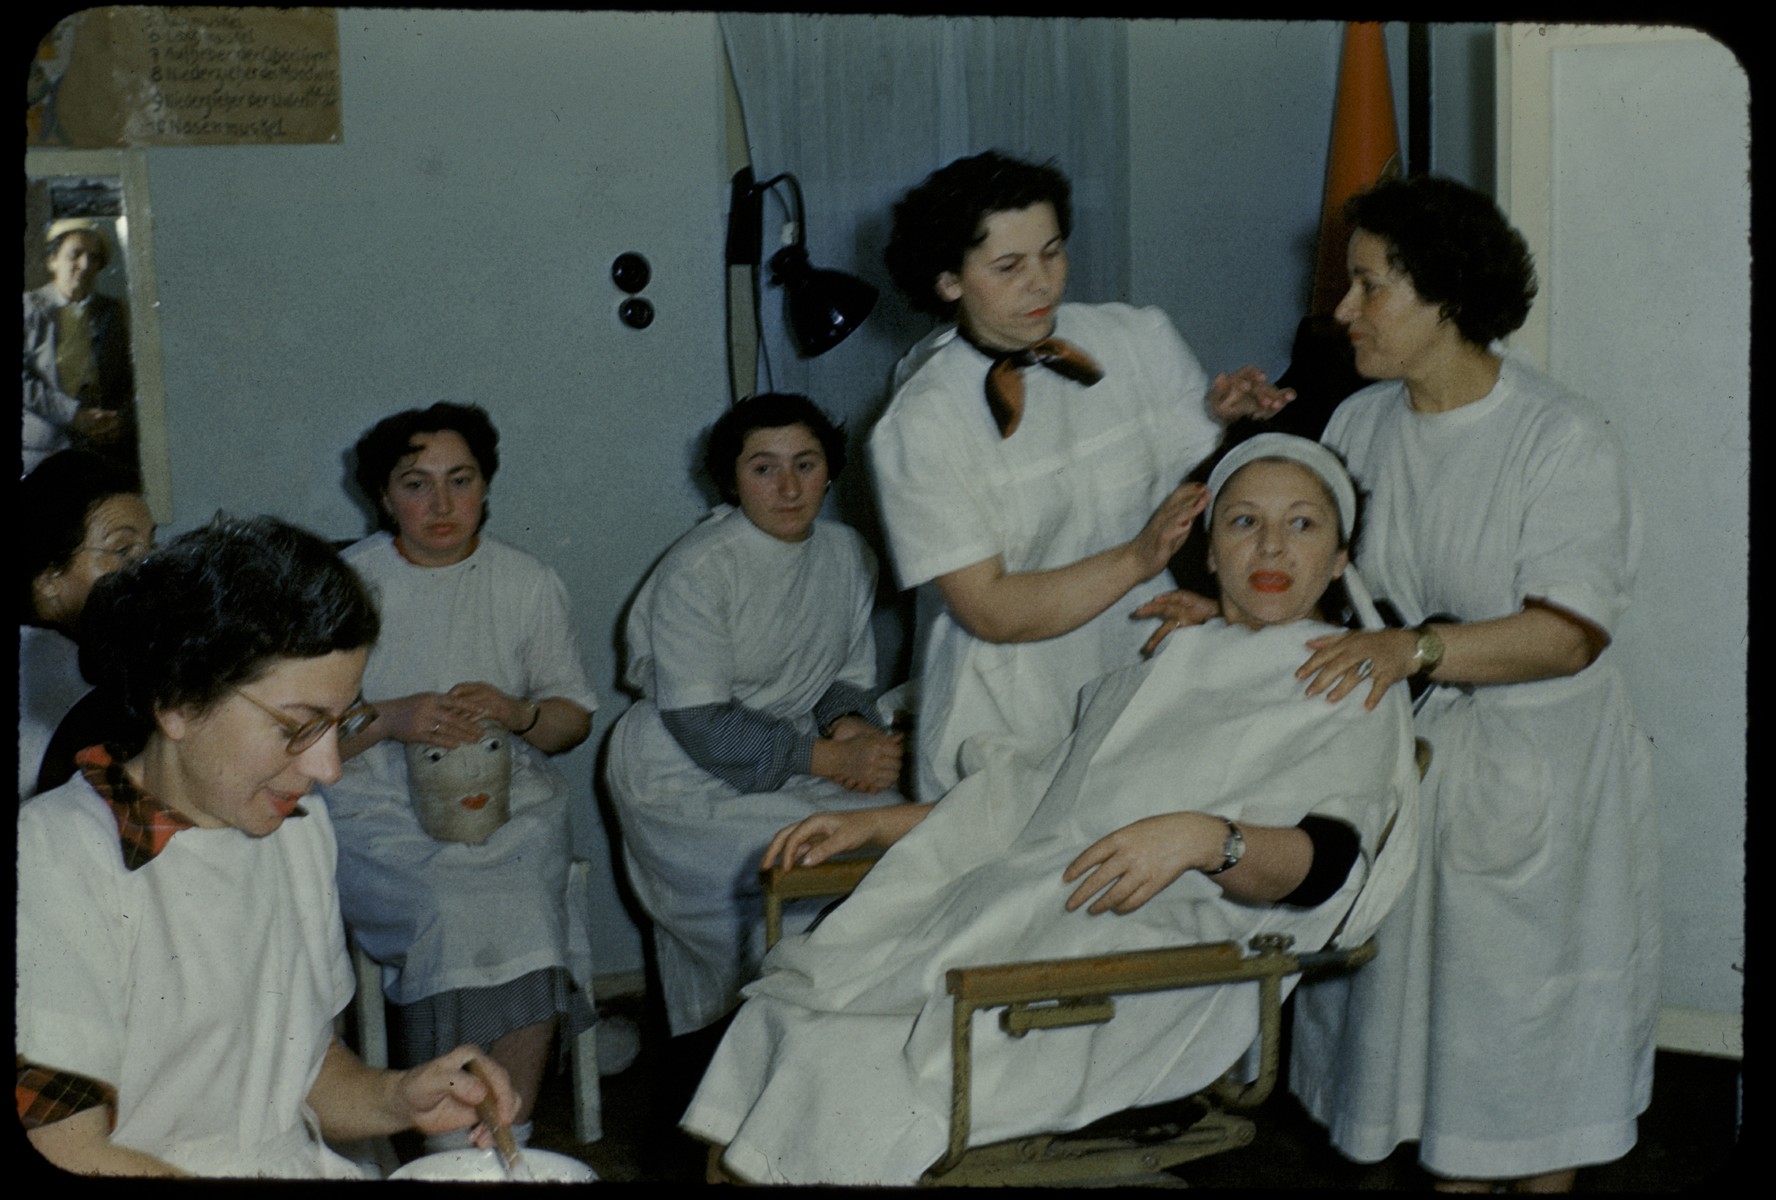 Women learn to become beauticians at an ORT school in the Foehrenwald displaced persons camp.